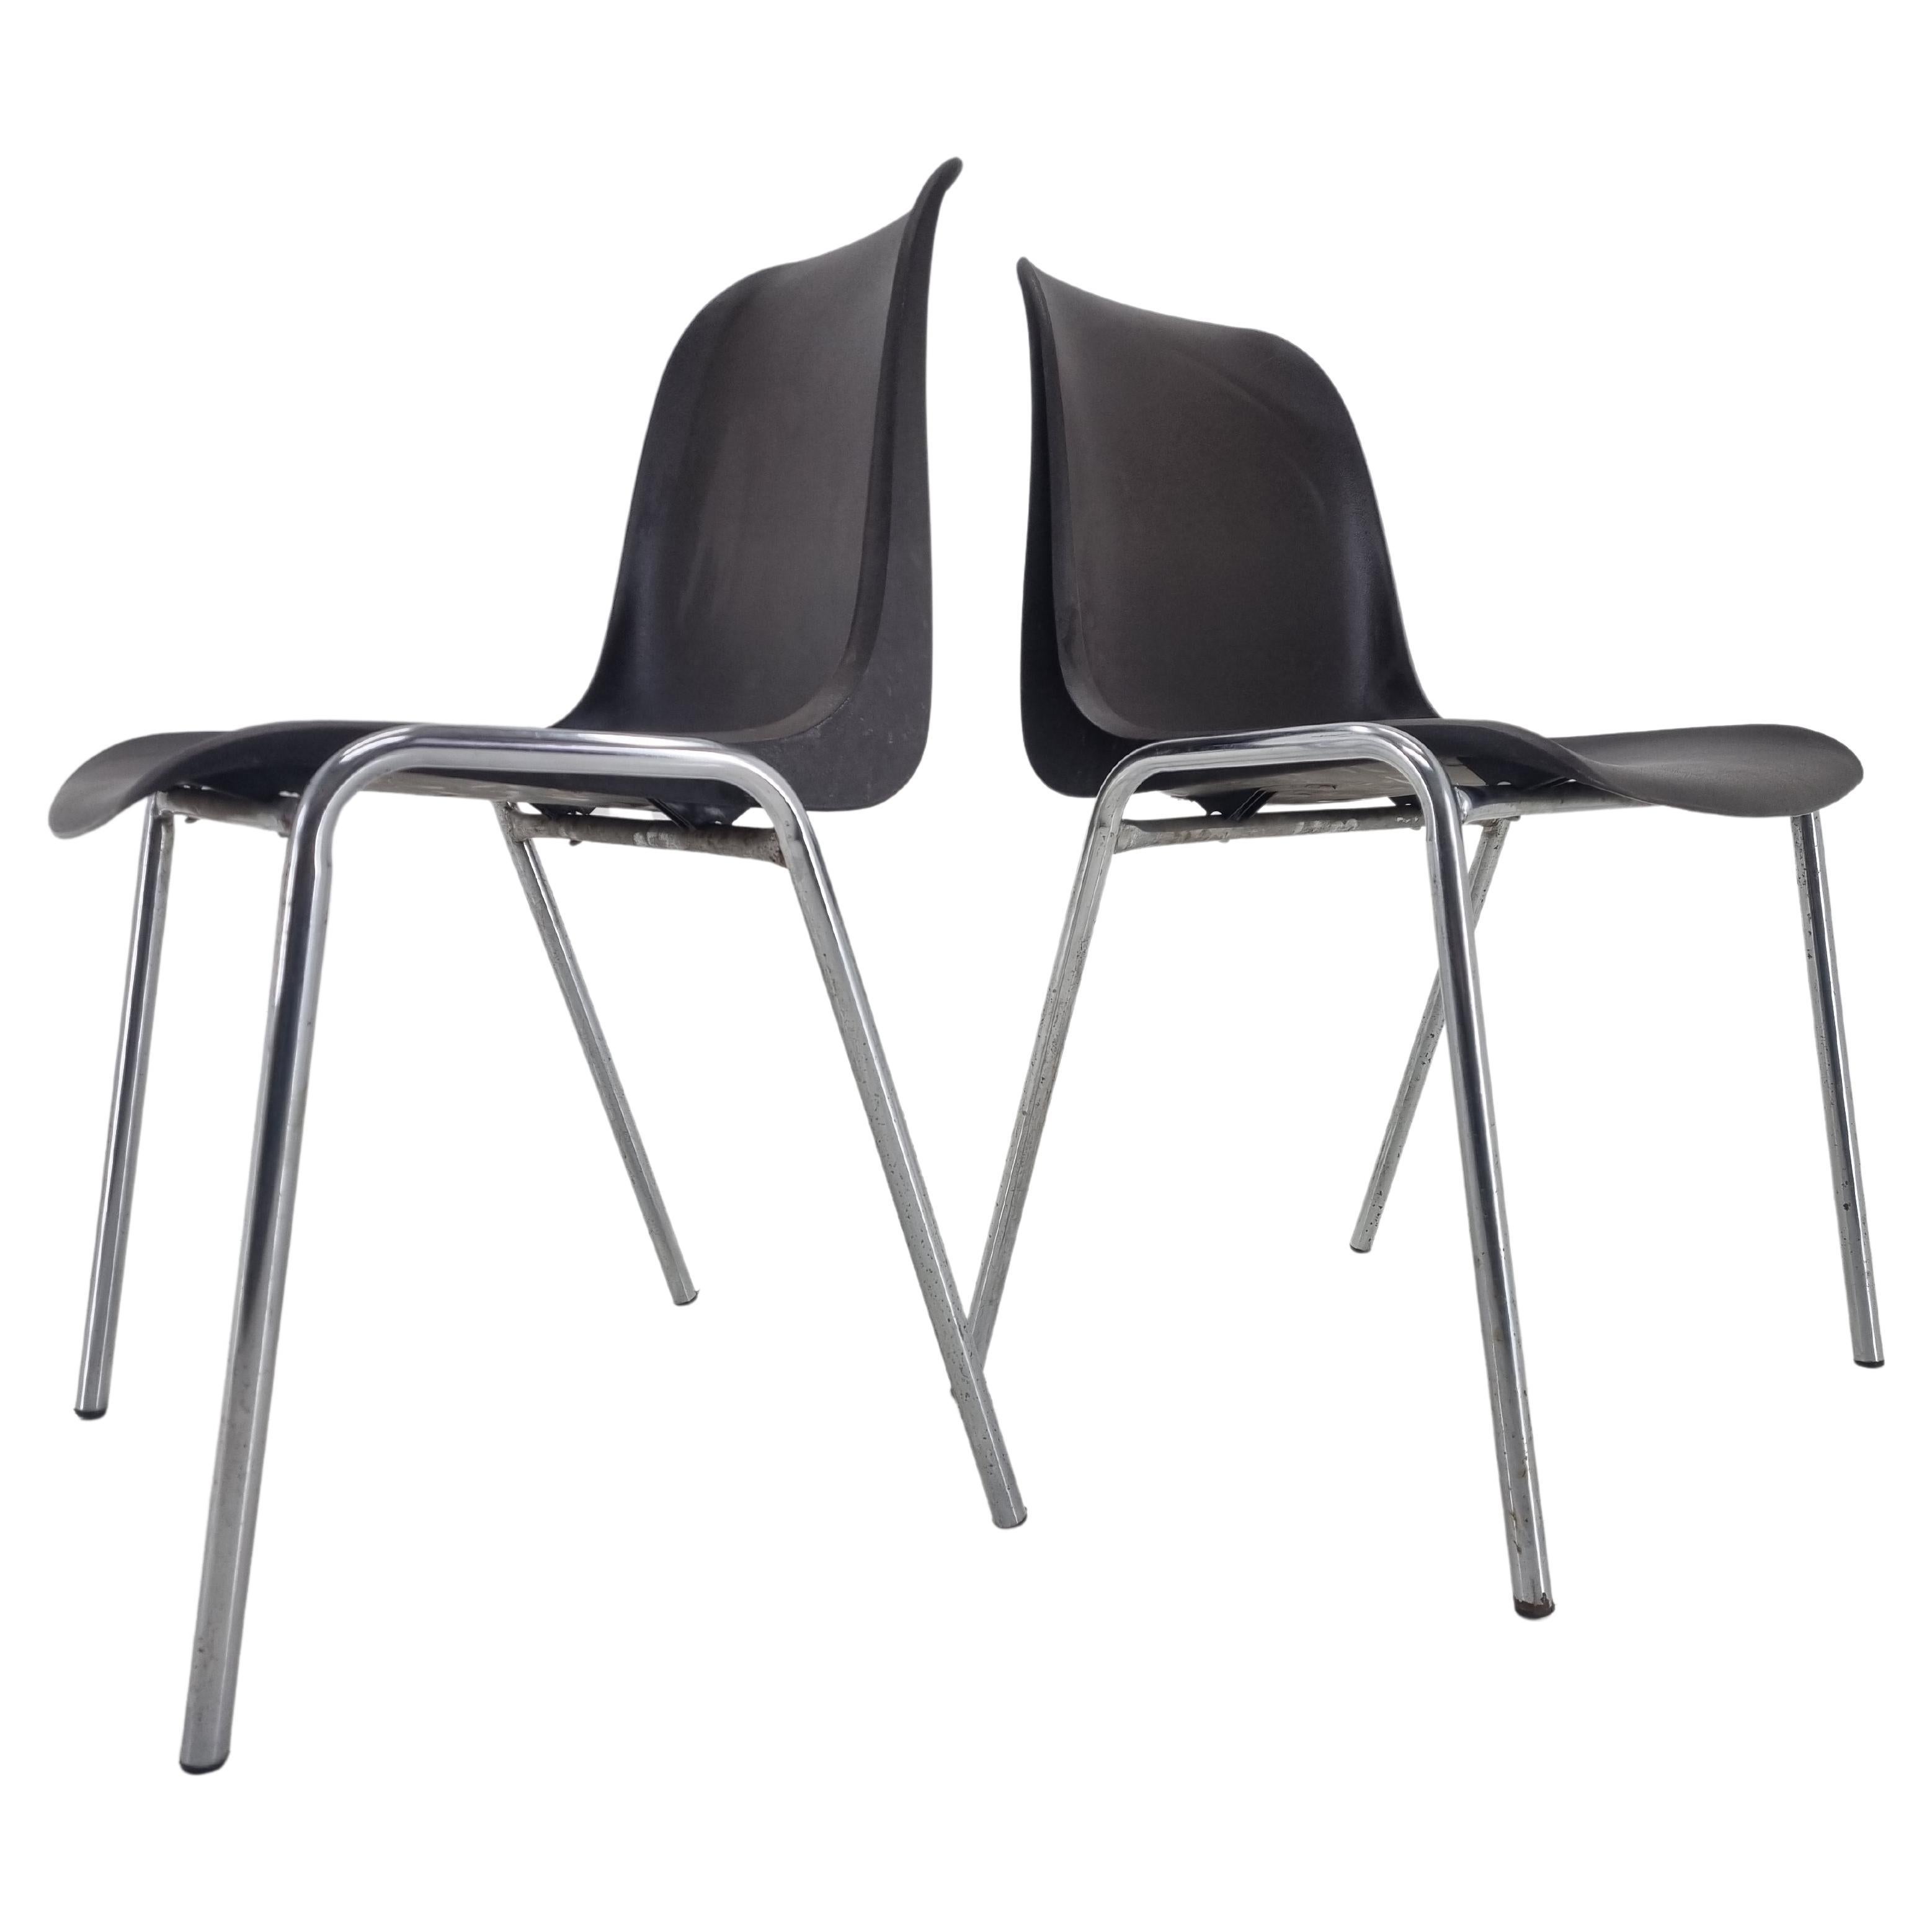 Set of 2 Midcentury Chairs Europa Designed by Helmut Starke, 1990s For Sale